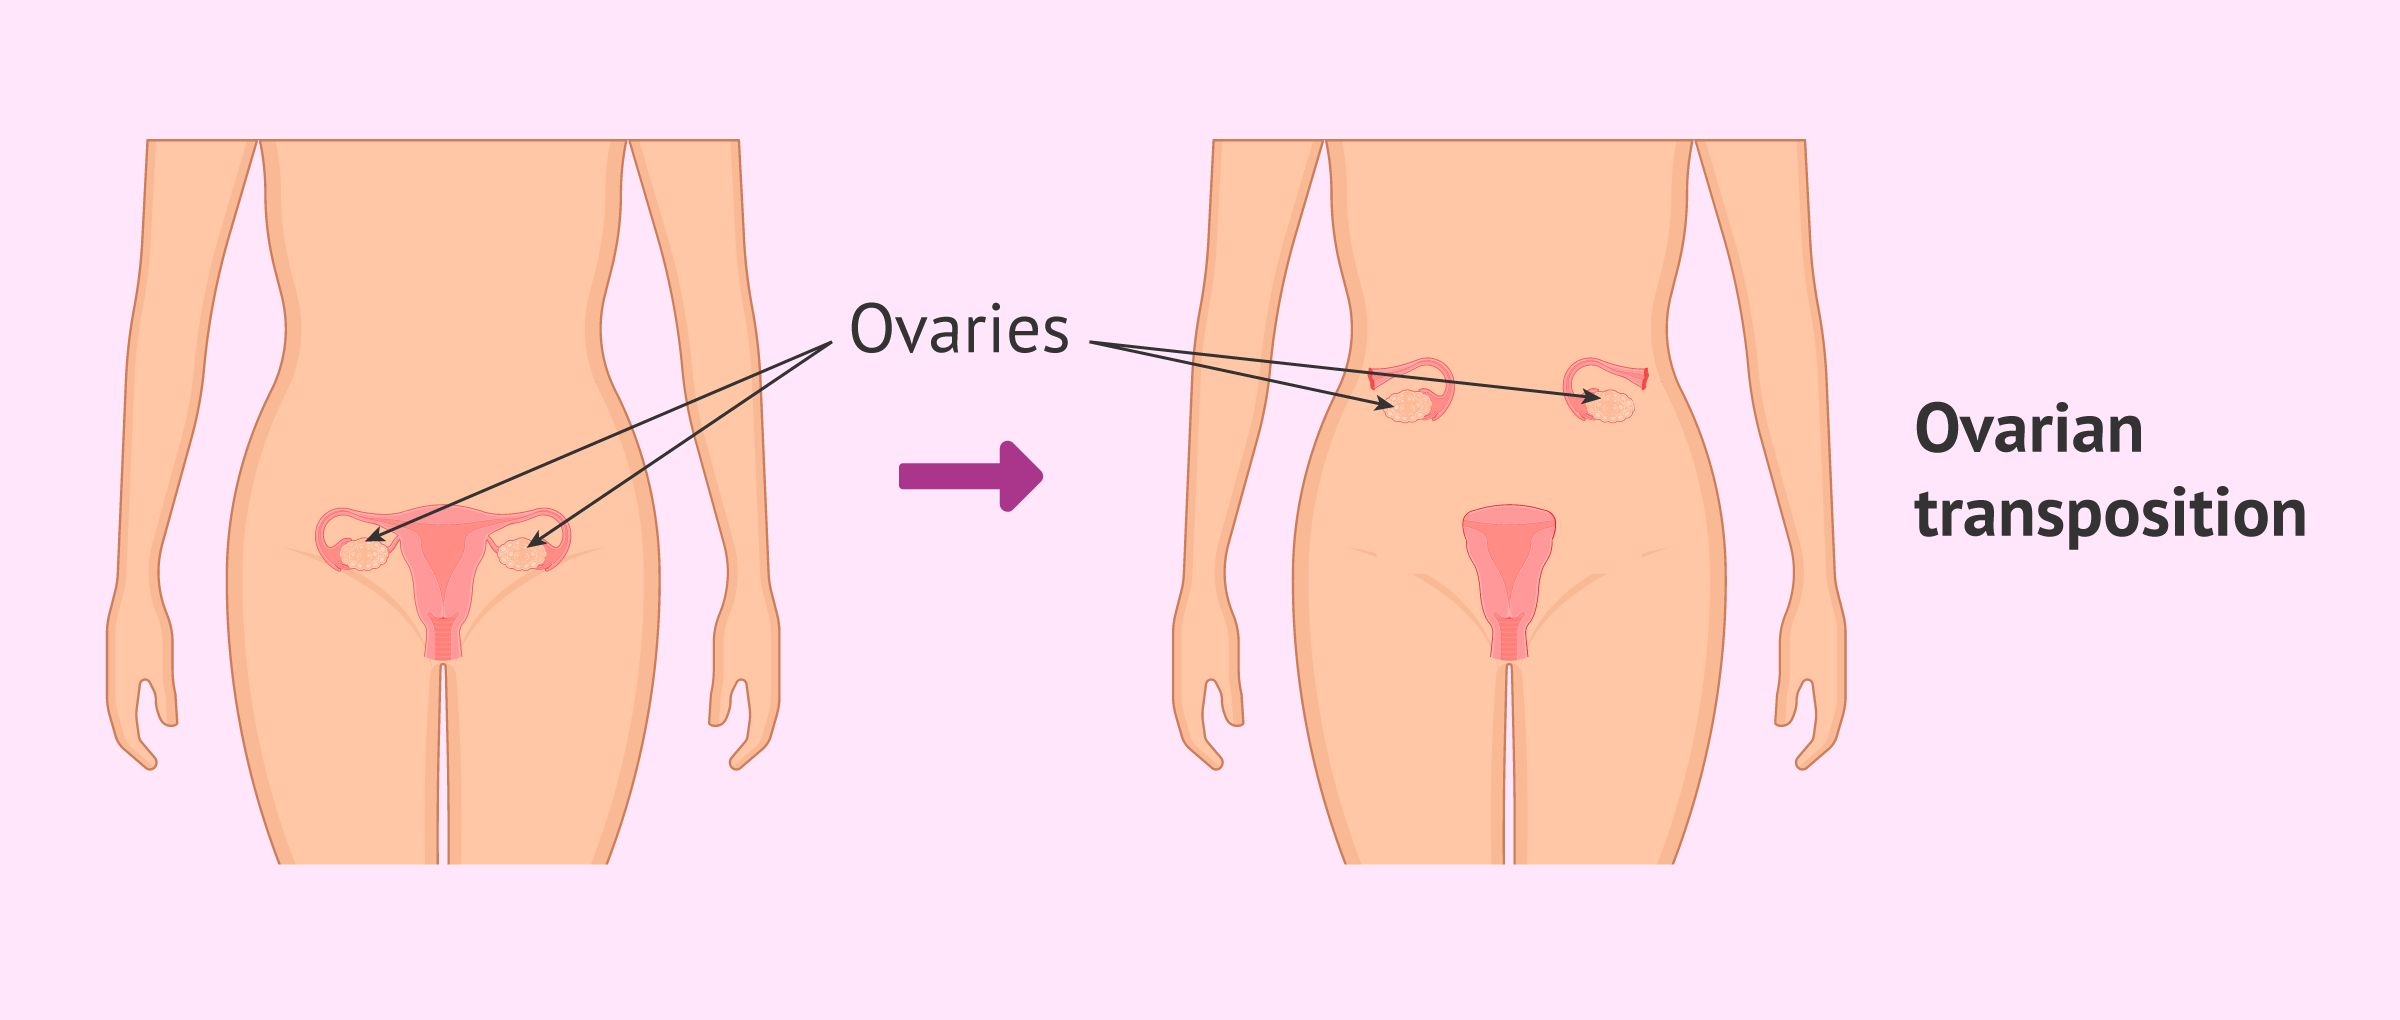 What is ovarian transposition?